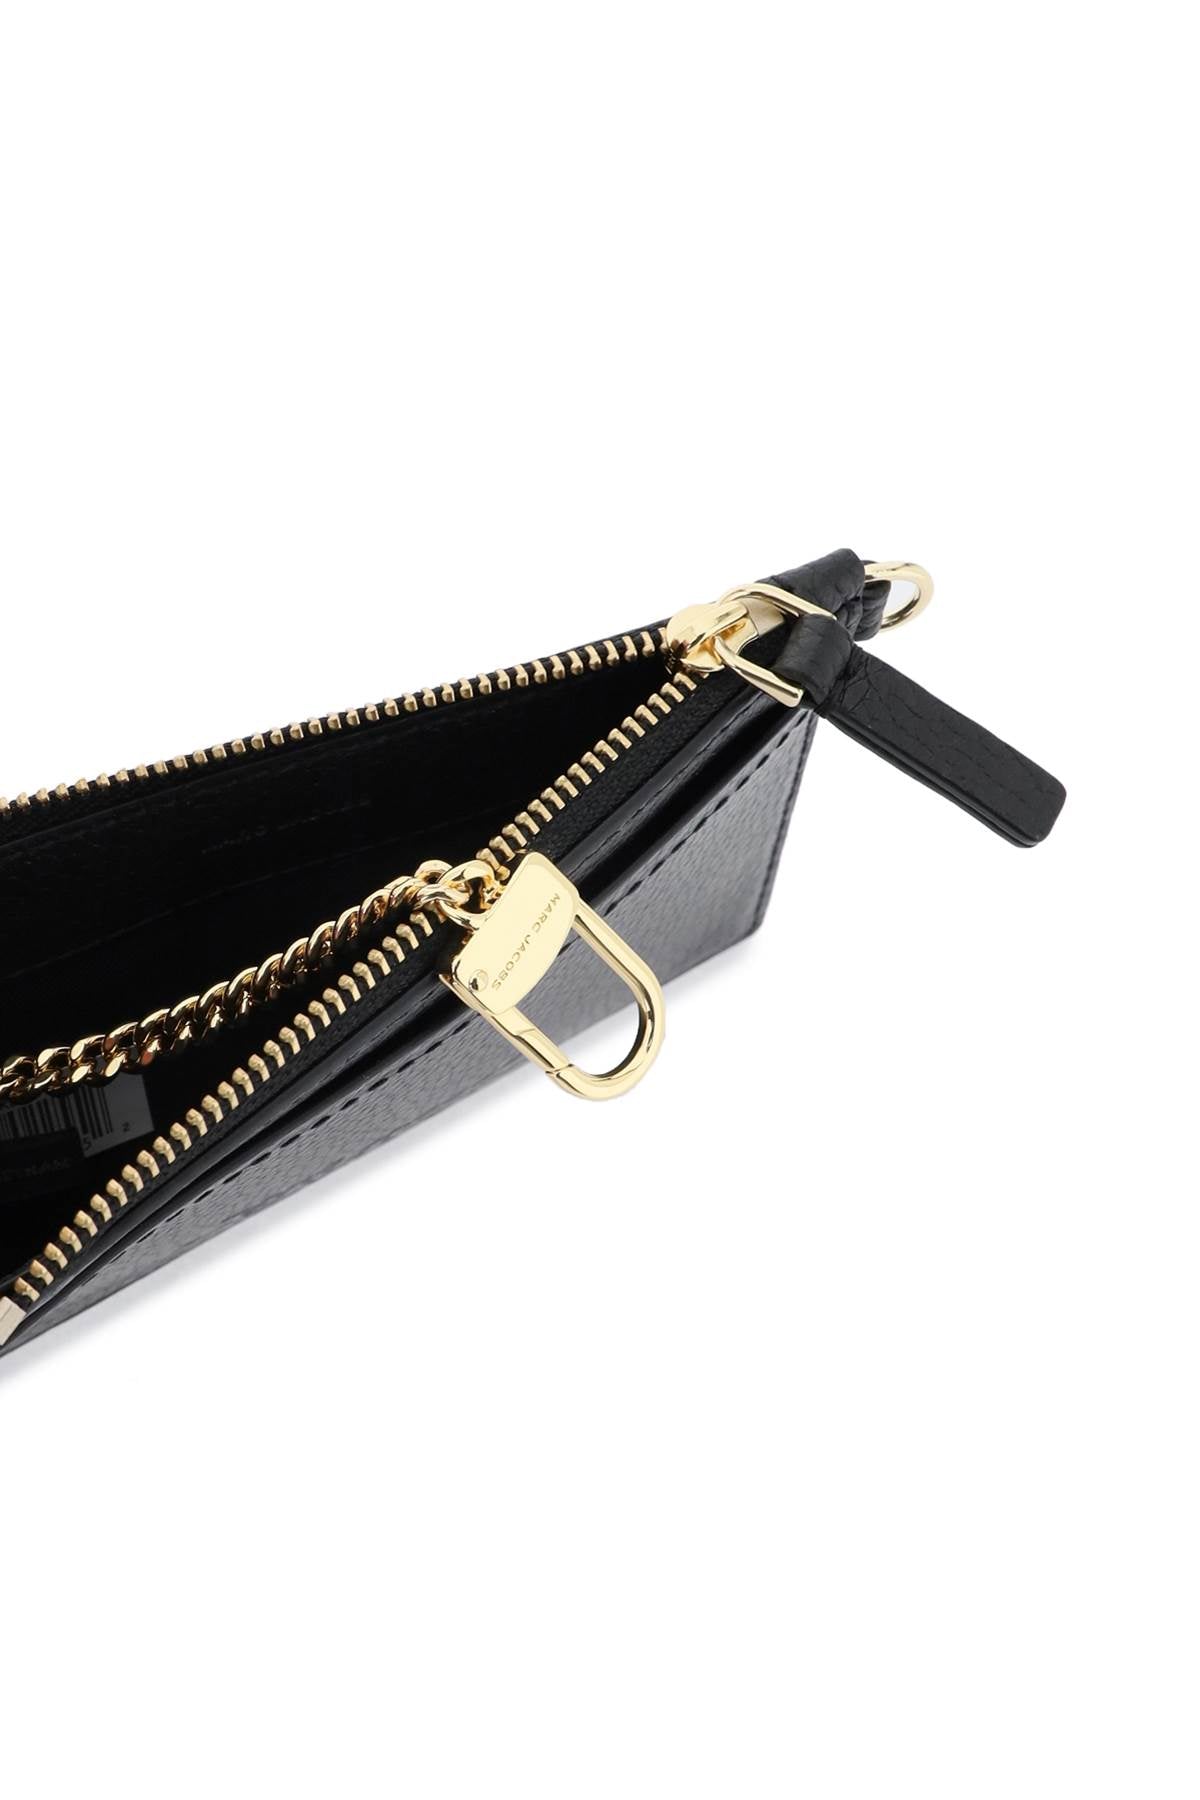 Marc Jacobs Marc jacobs the leather top zip wristlet